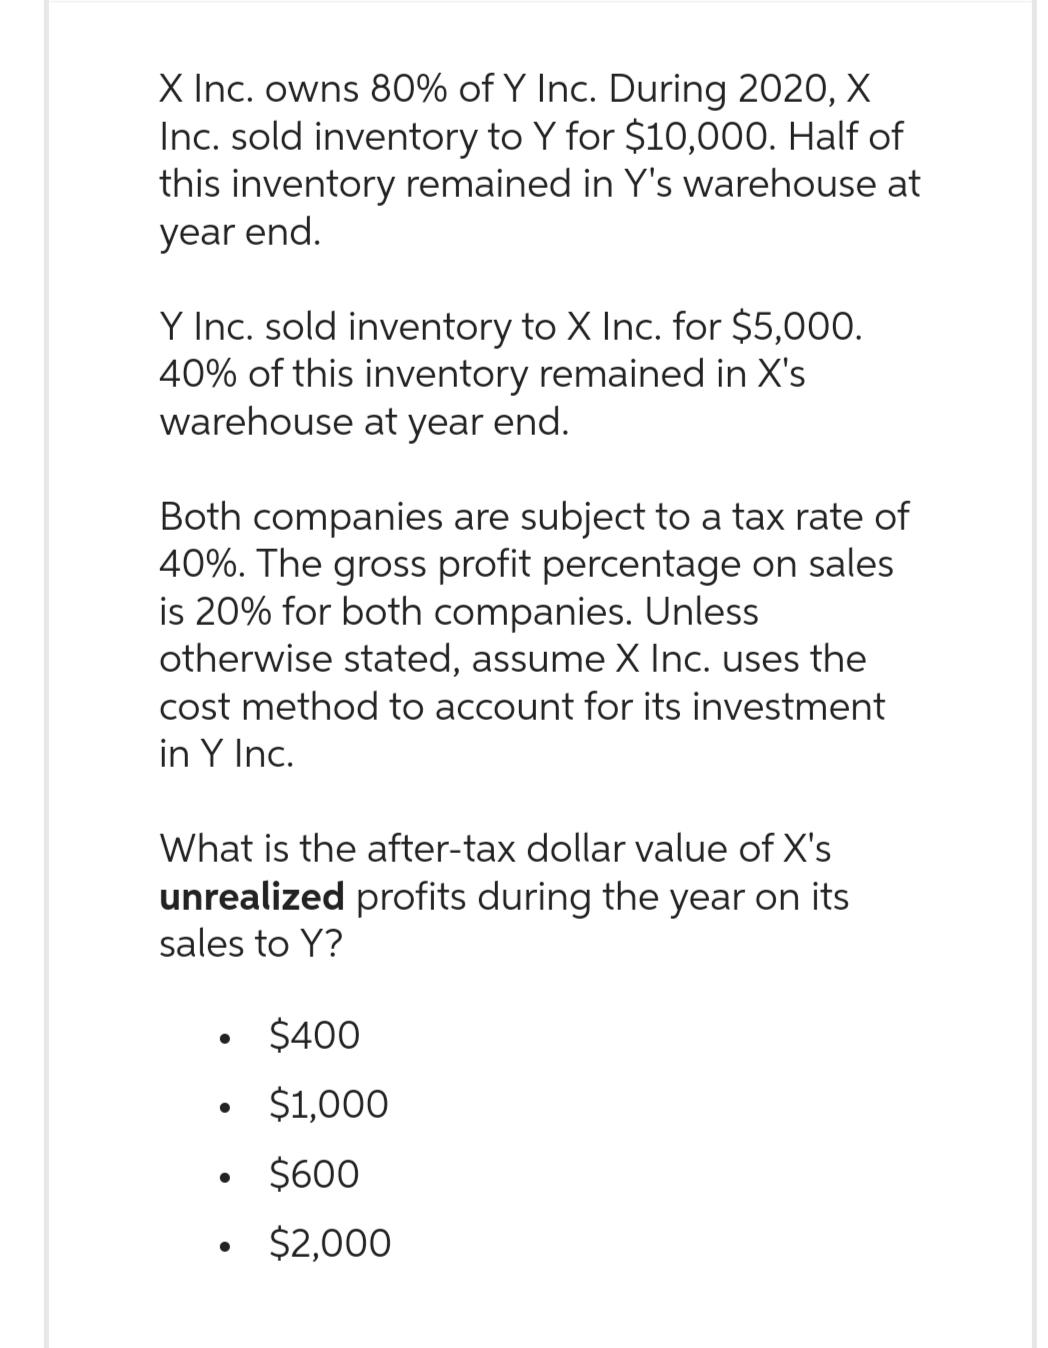 X Inc. owns 80% of Y Inc. During 2020, X
Inc. sold inventory to Y for $10,000. Half of
this inventory remained in Y's warehouse at
year end.
Y Inc. sold inventory to X Inc. for $5,000.
40% of this inventory remained in X's
warehouse at year end.
Both companies are subject to a tax rate of
40%. The gross profit percentage on sales
is 20% for both companies. Unless
otherwise stated, assume X Inc. uses the
cost method to account for its investment
in Y Inc.
What is the after-tax dollar value of X's
unrealized profits during the year on its
sales to Y?
$400
$1,000
$600
• $2,000
●